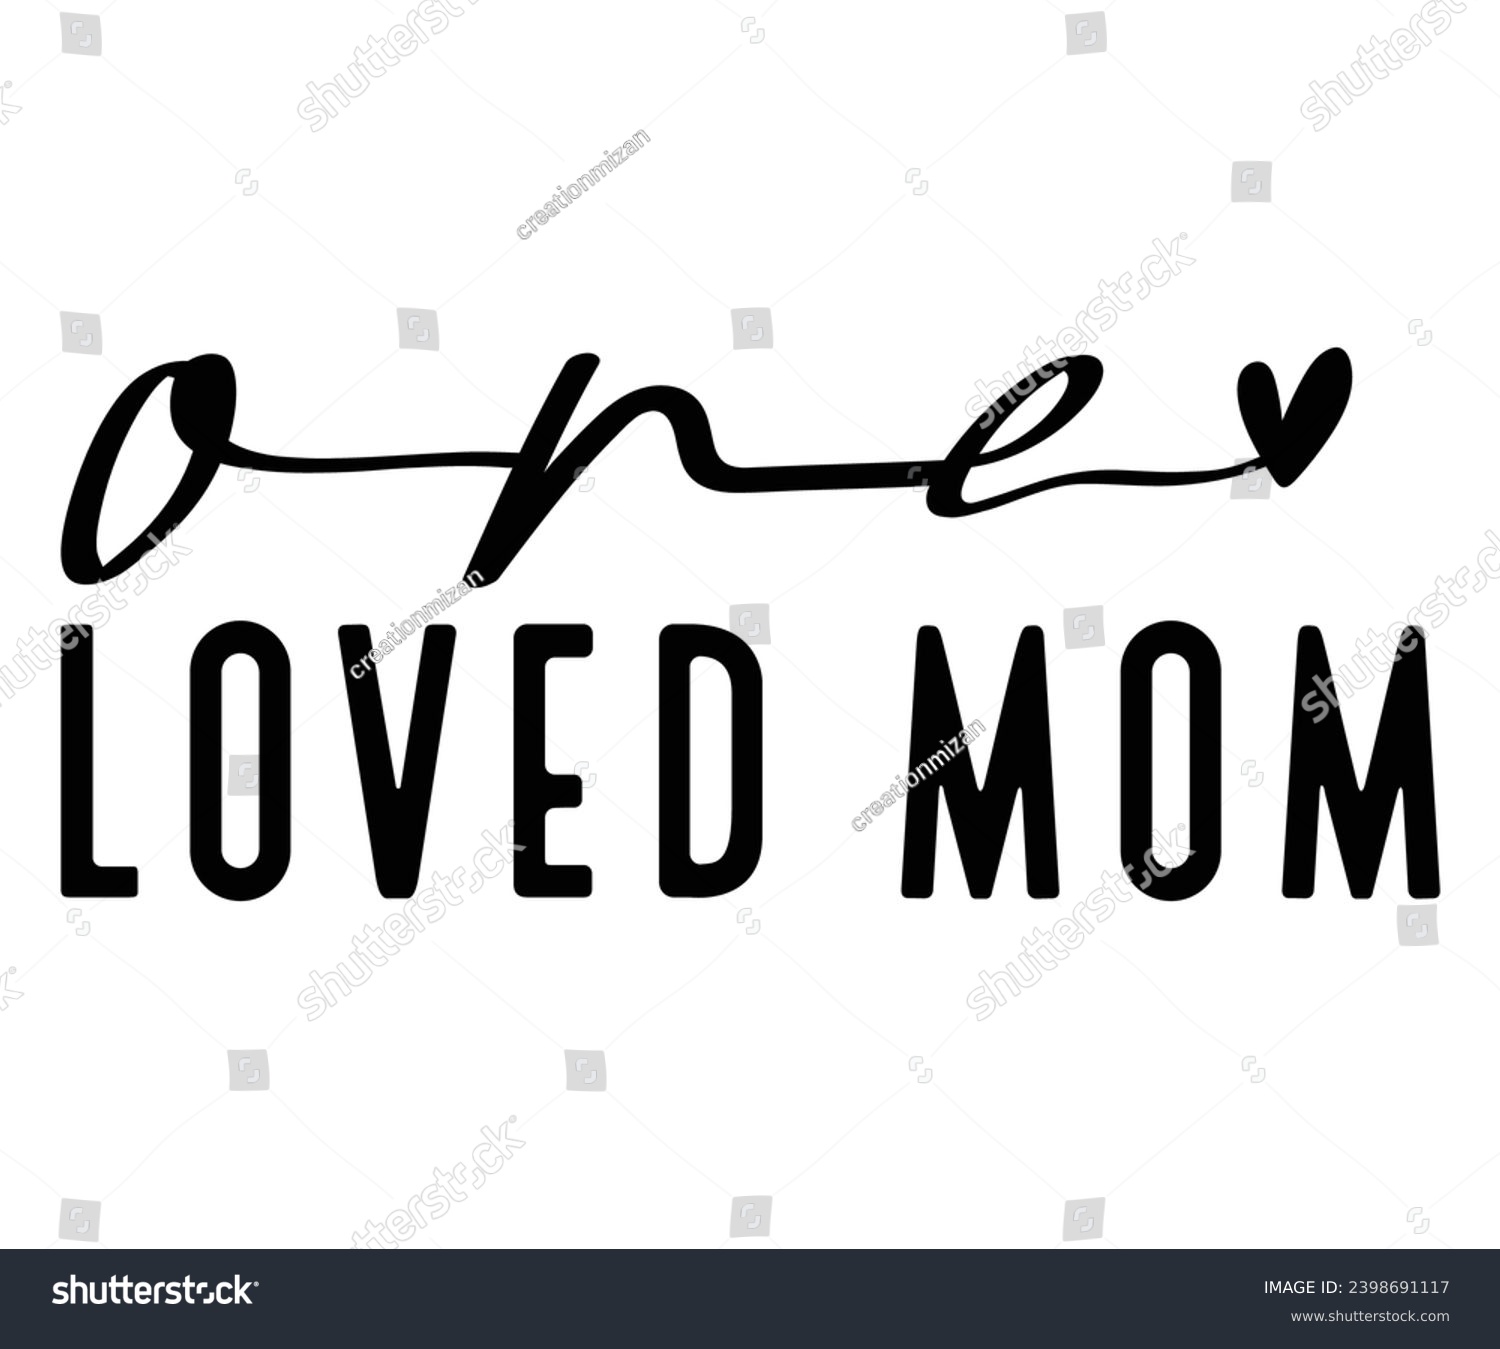 SVG of one loved mom Svg,Mom Life,Mother's Day,Stacked Mama,Boho Mama,wavy stacked letters,Girl Mom,Football Mom,Cool Mom,Cat Mom svg